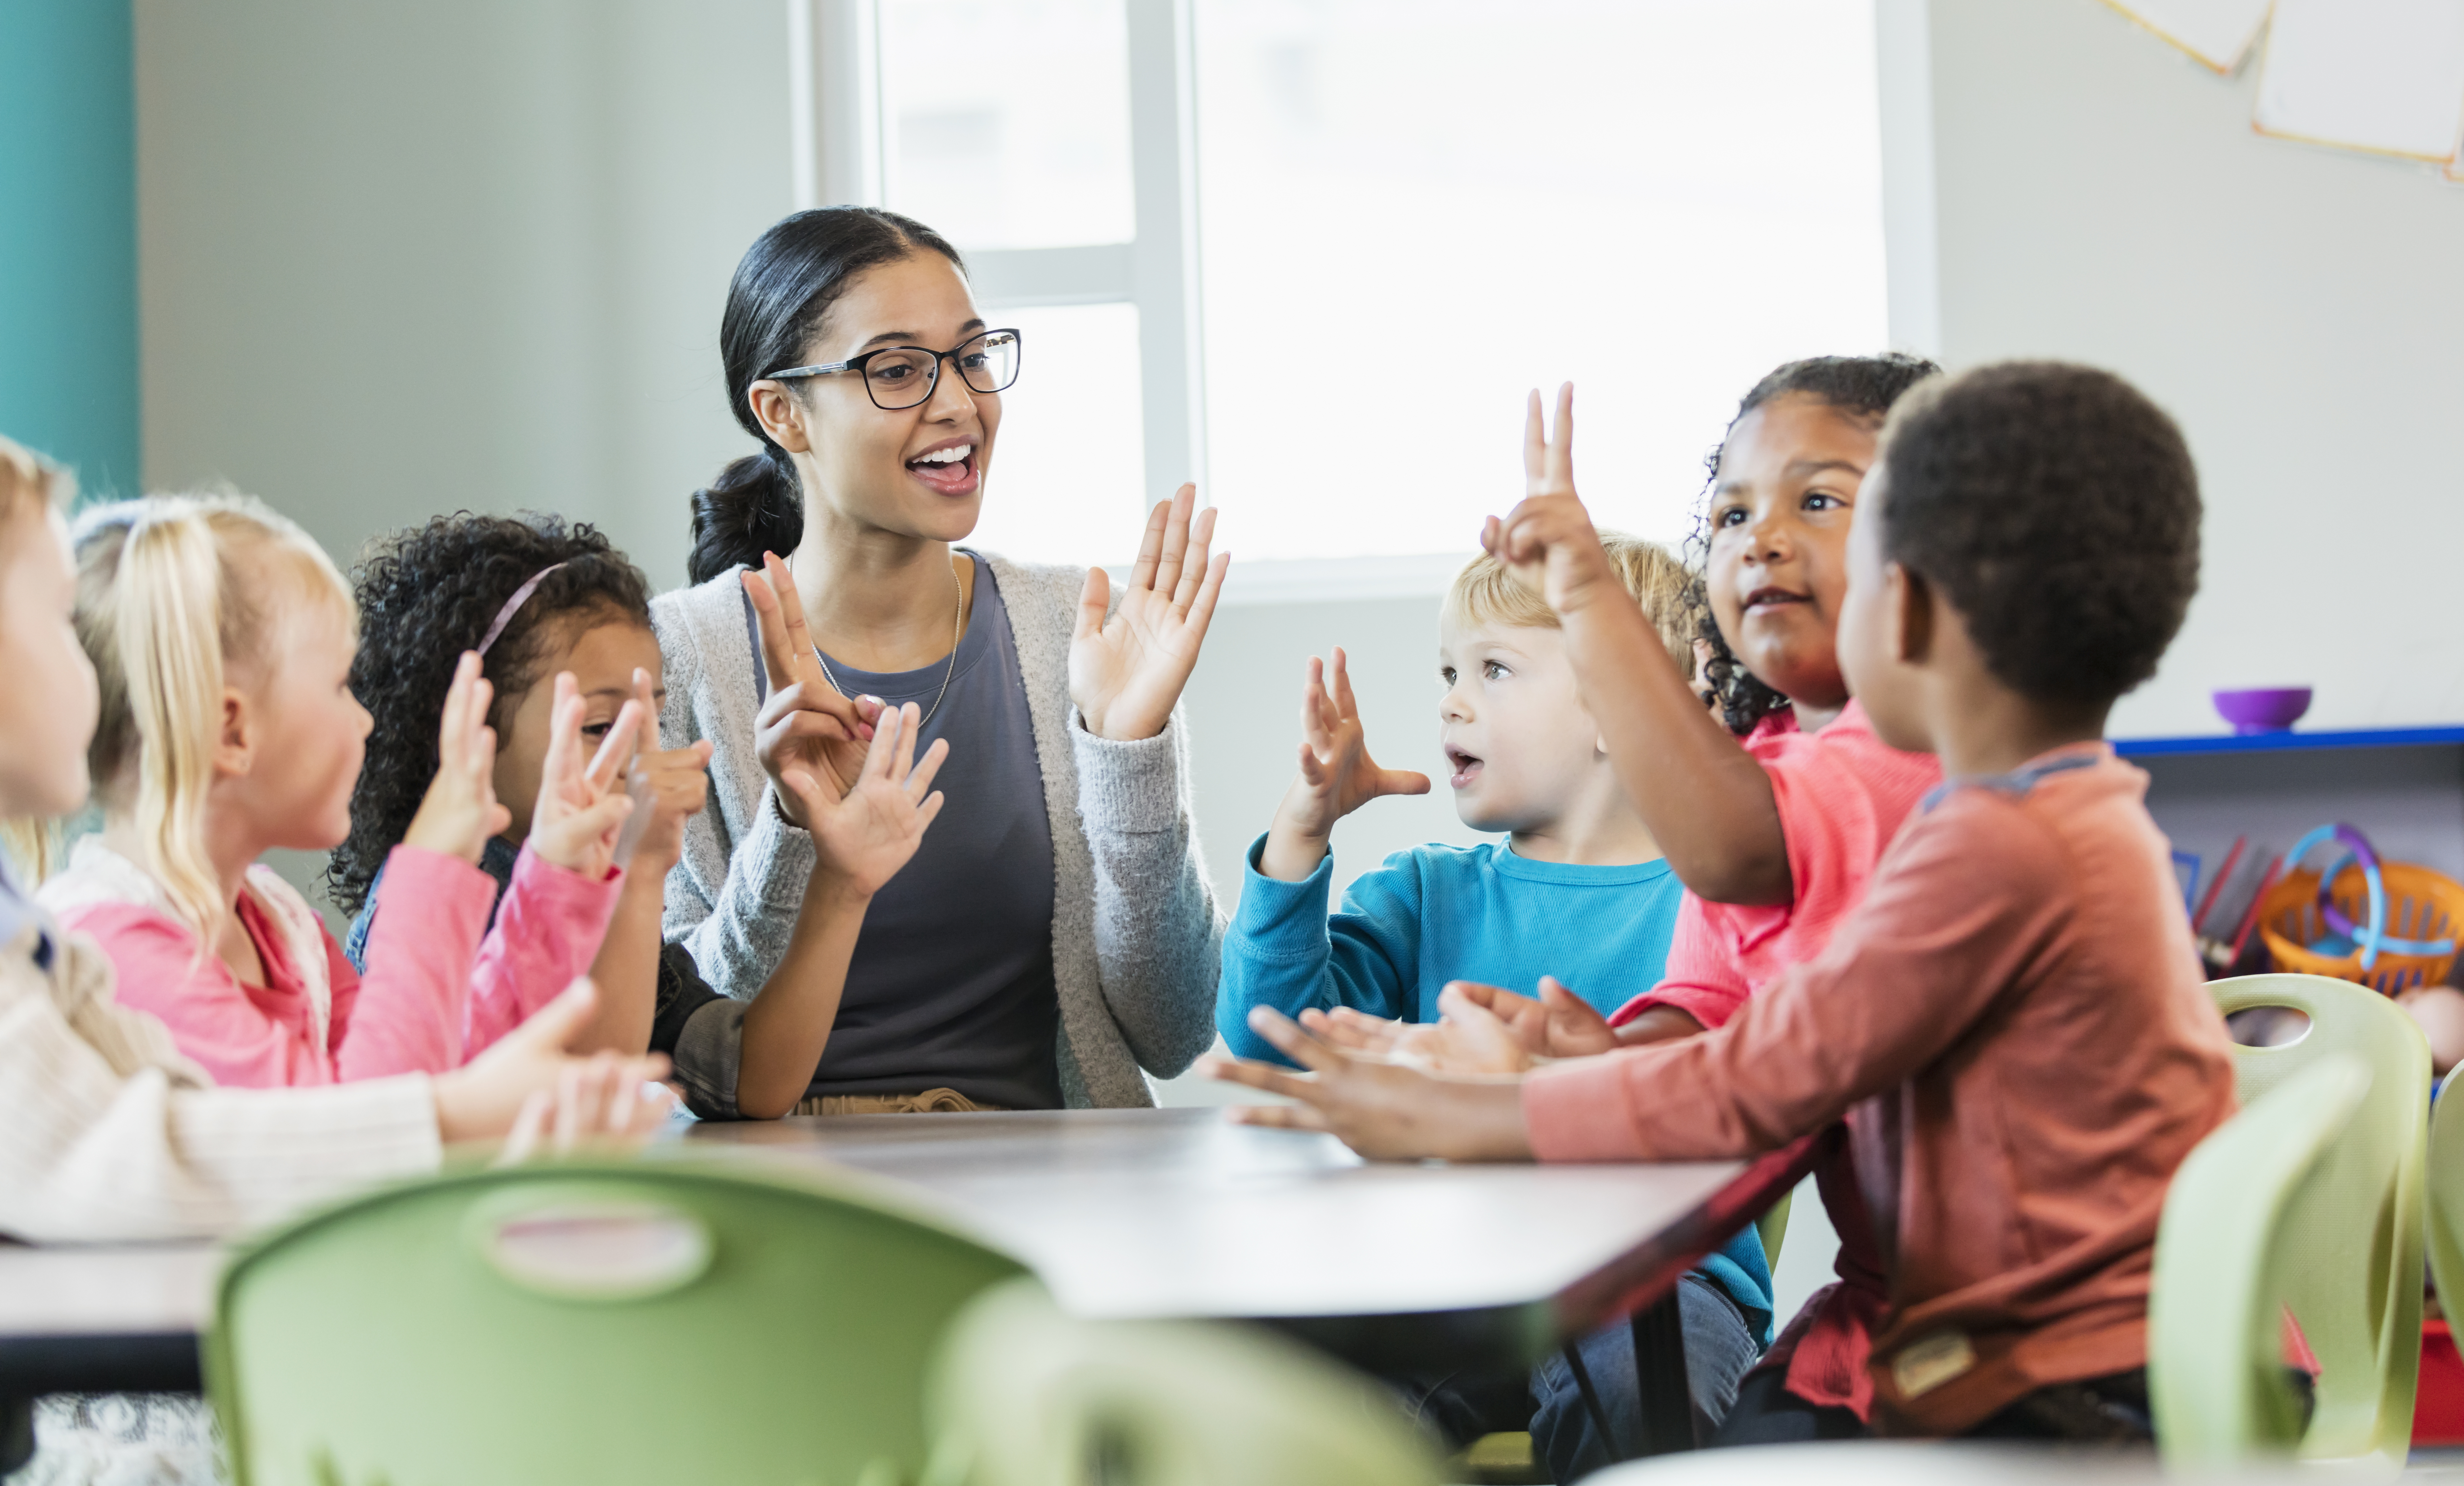 A multi-ethnic group of six preschool children with a mixed race African-American and Caucasian teacher, sitting around a table in a classroom. The teacher and some of her students have their hands raised, holding up fingers, learning how to count.